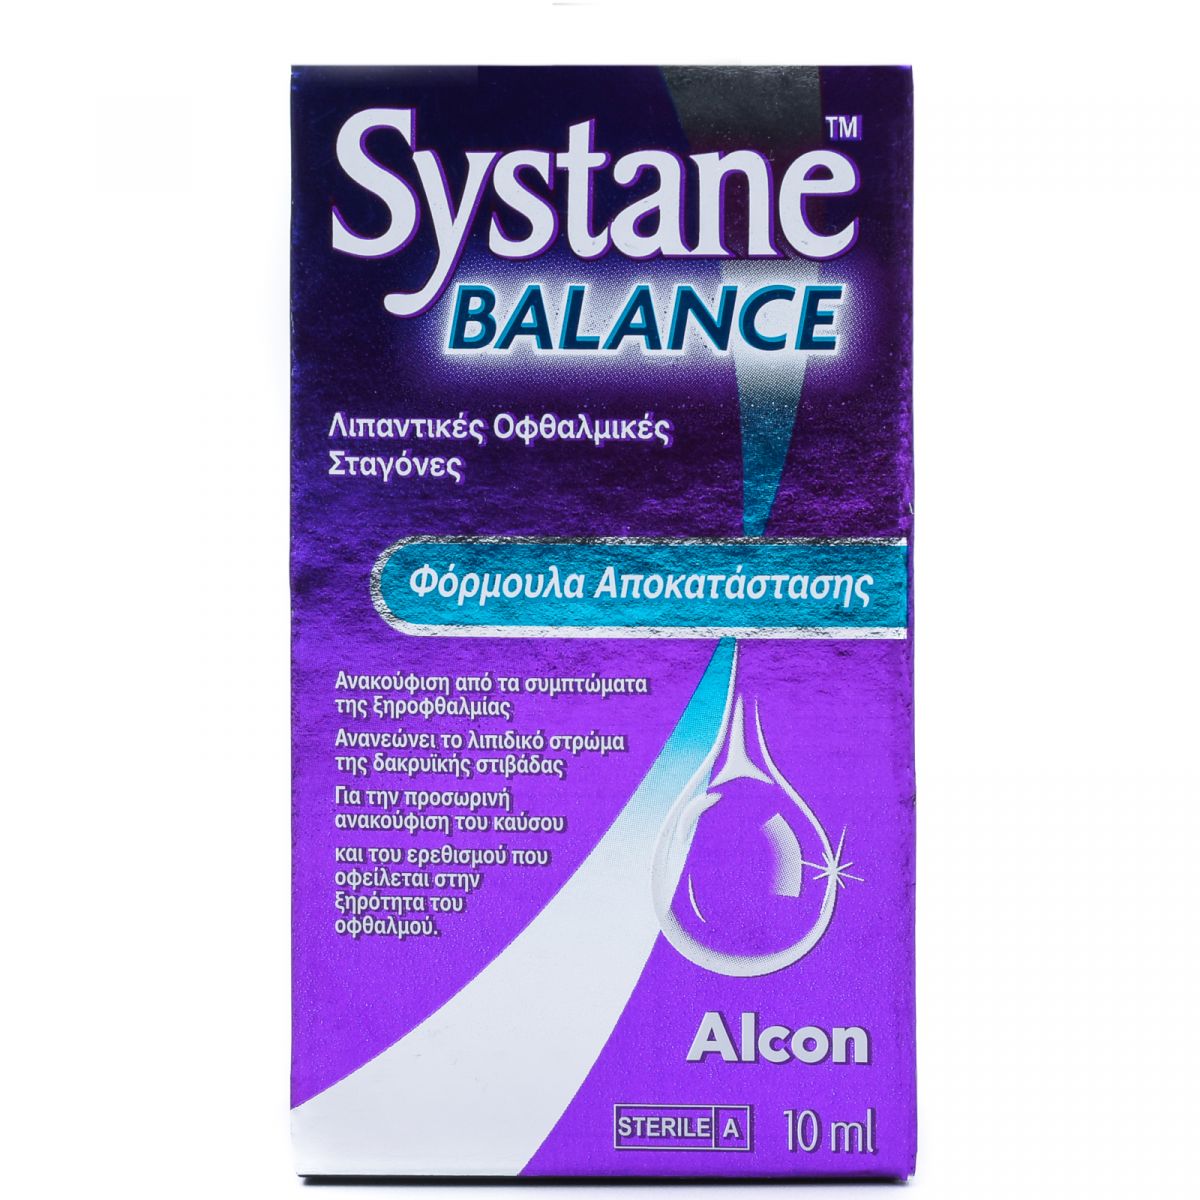 SYSTANE BALANCE CONTACT LENSES SOLUTION FOR DRY EYES 10ML